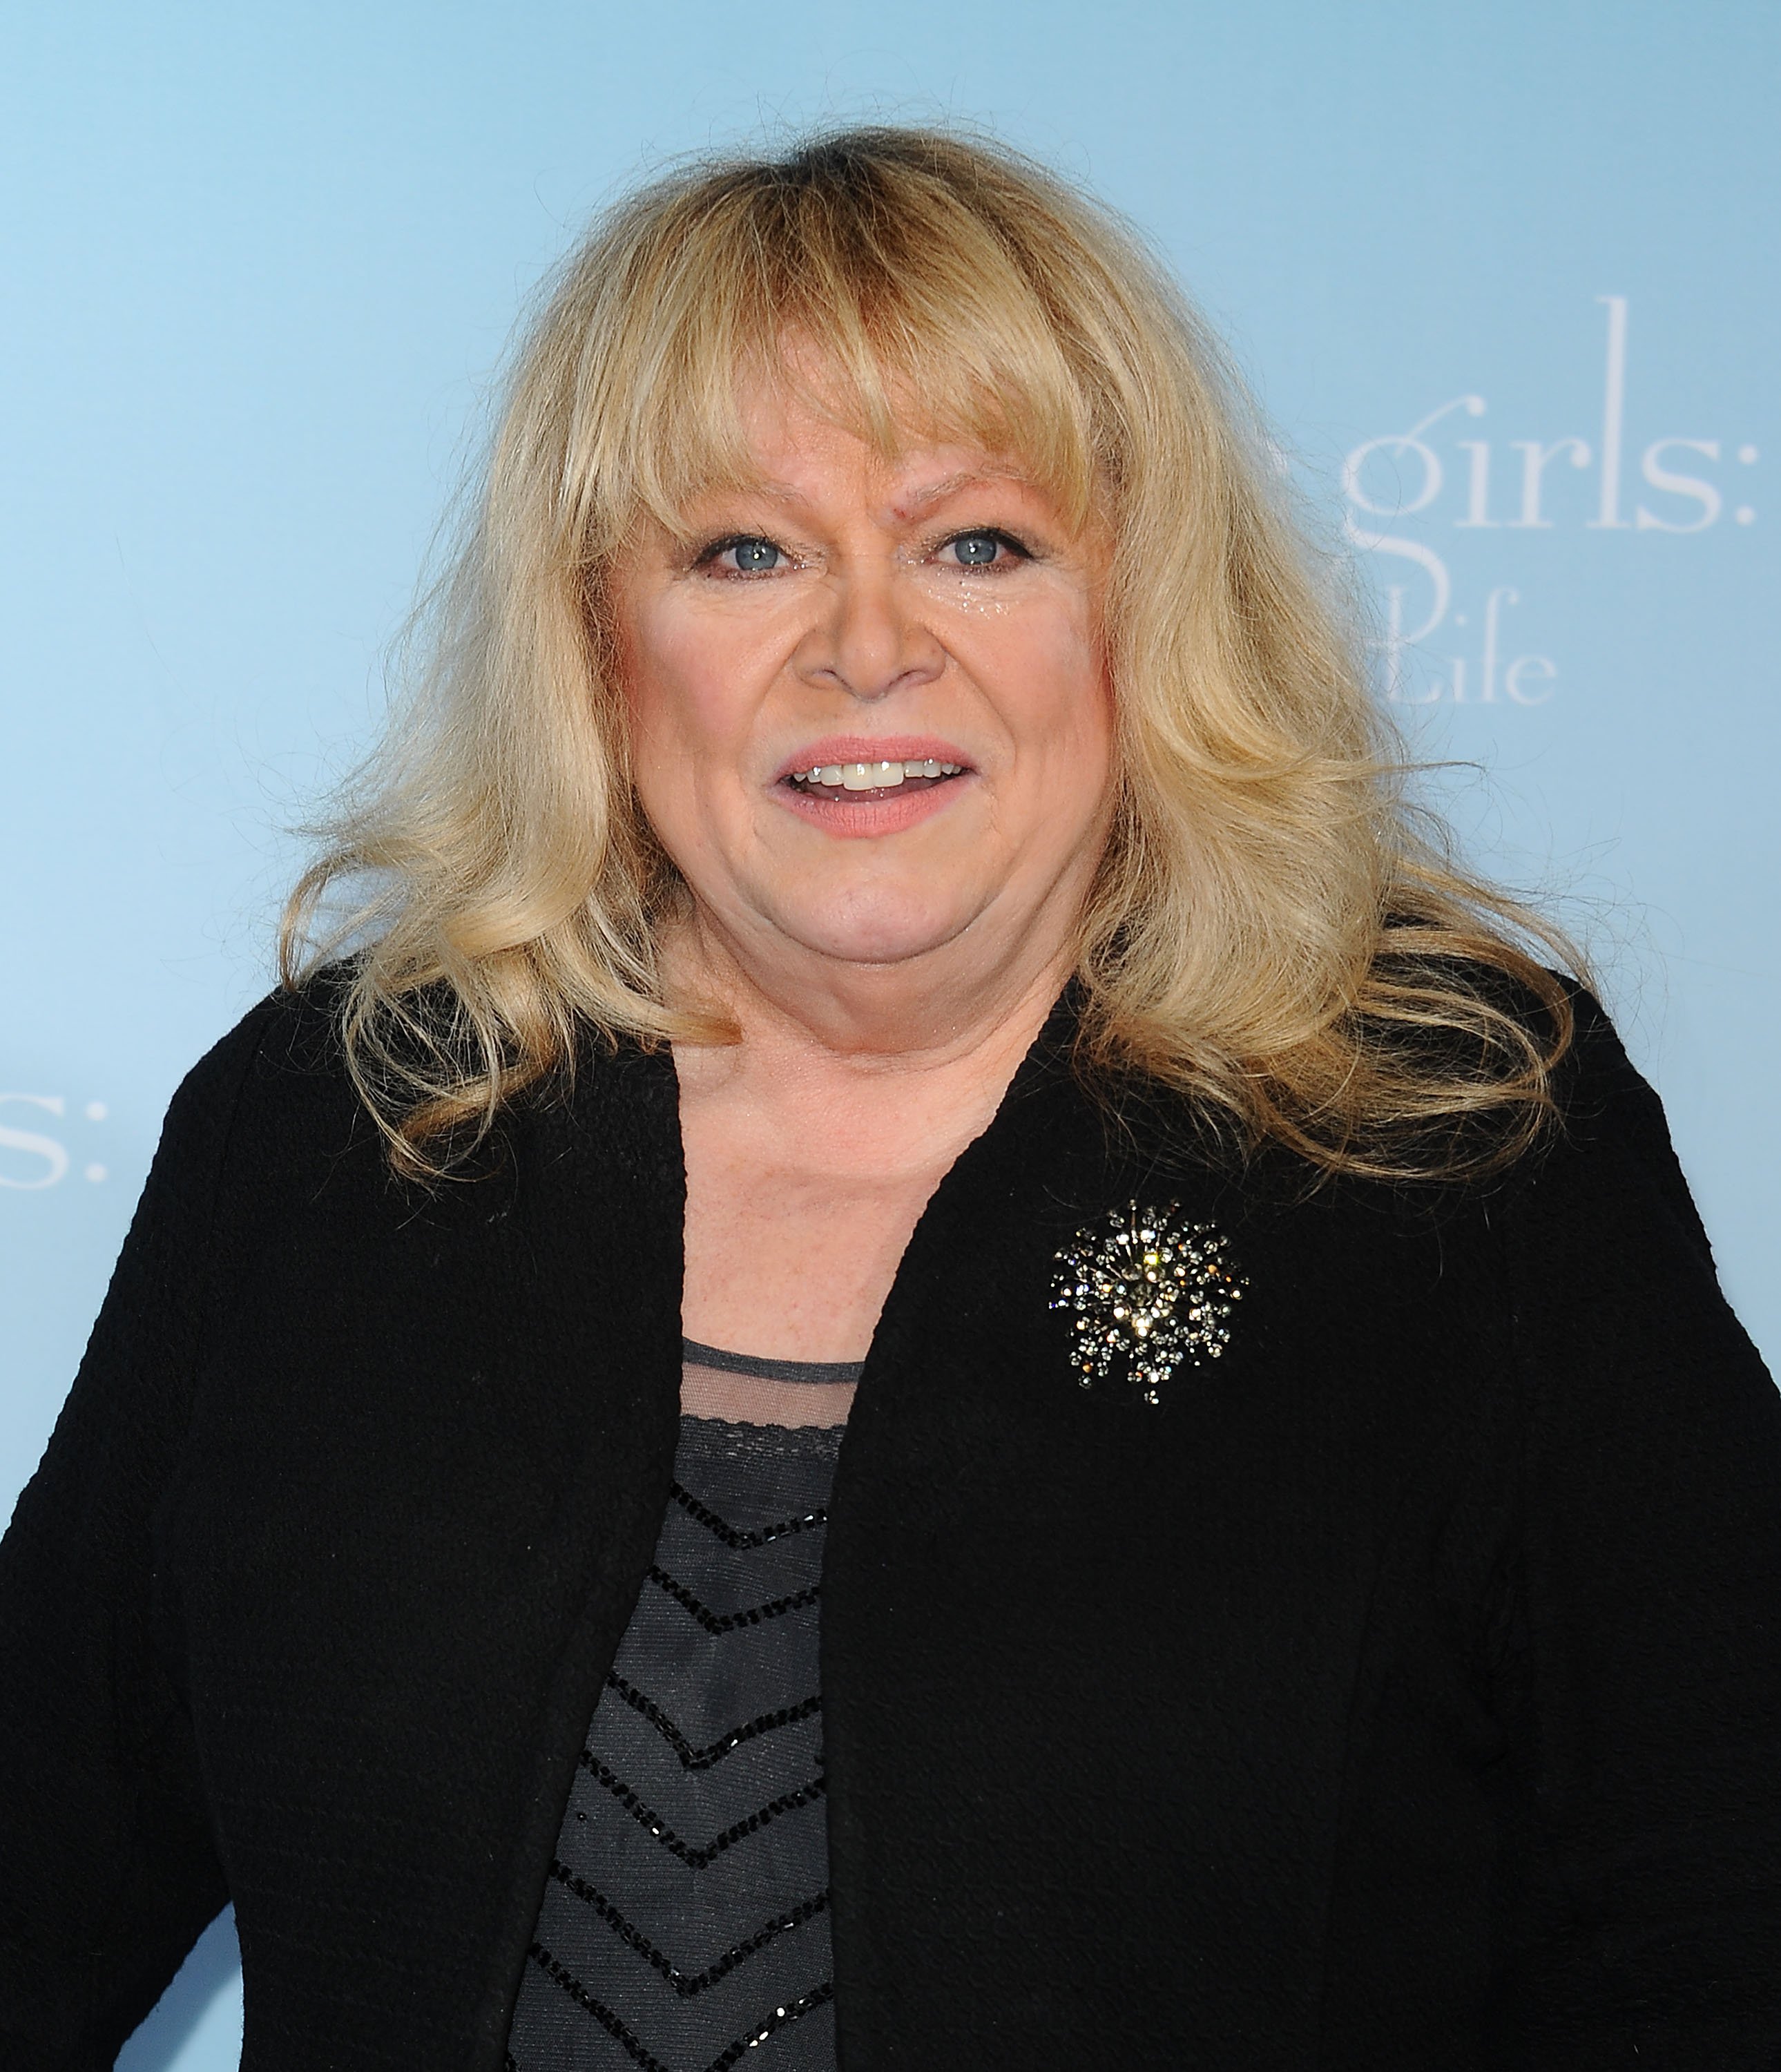 Sally Struthers attends the premiere of "Gilmore Girls: A Year in the Life" on November 18, 2016, in Los Angeles, California. | Source: Getty Images.